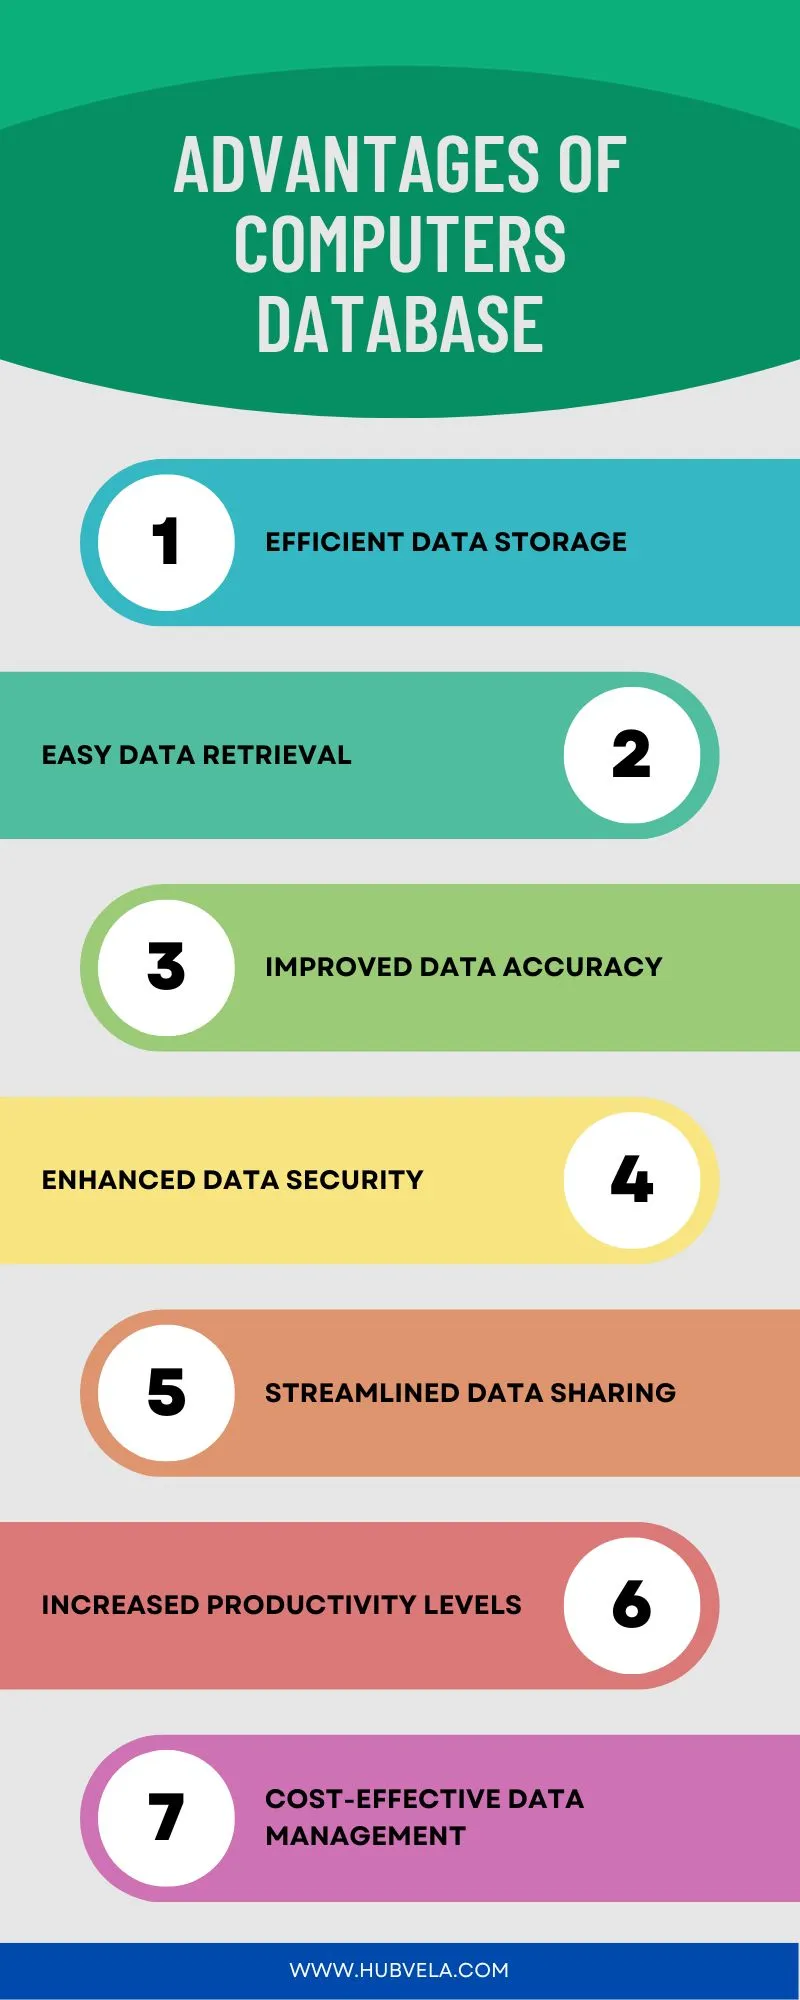 Advantages of Computers Database Infographic